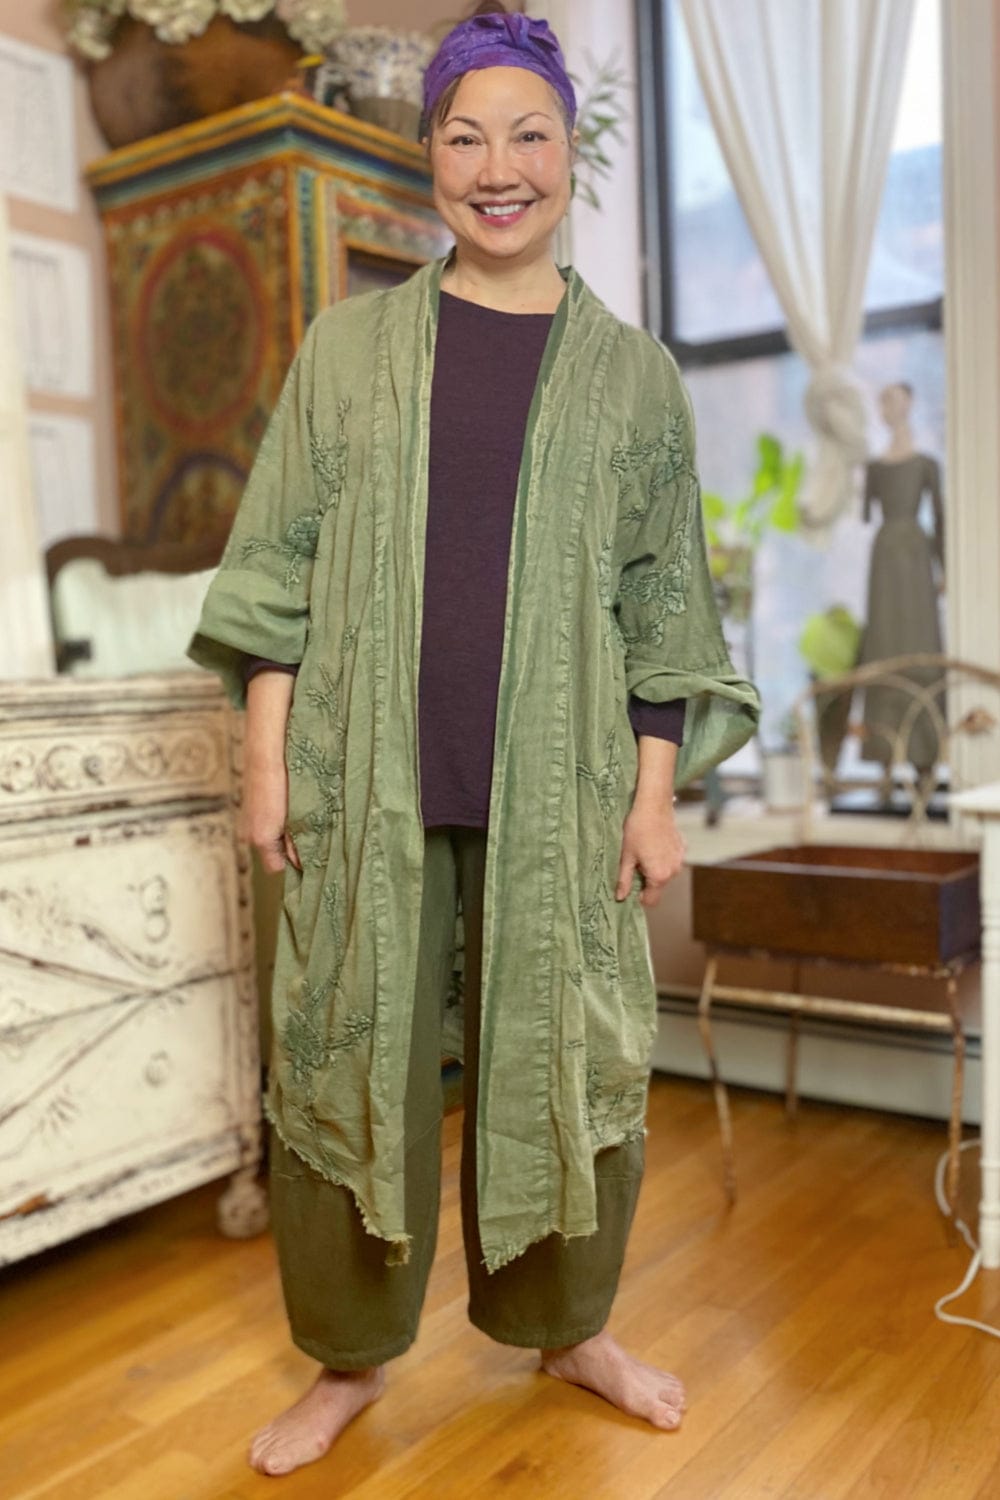 Long cotton duster jacket worn with silk scarf and linen crop pant. The outfit is green and purple and styled on a smiling woman.